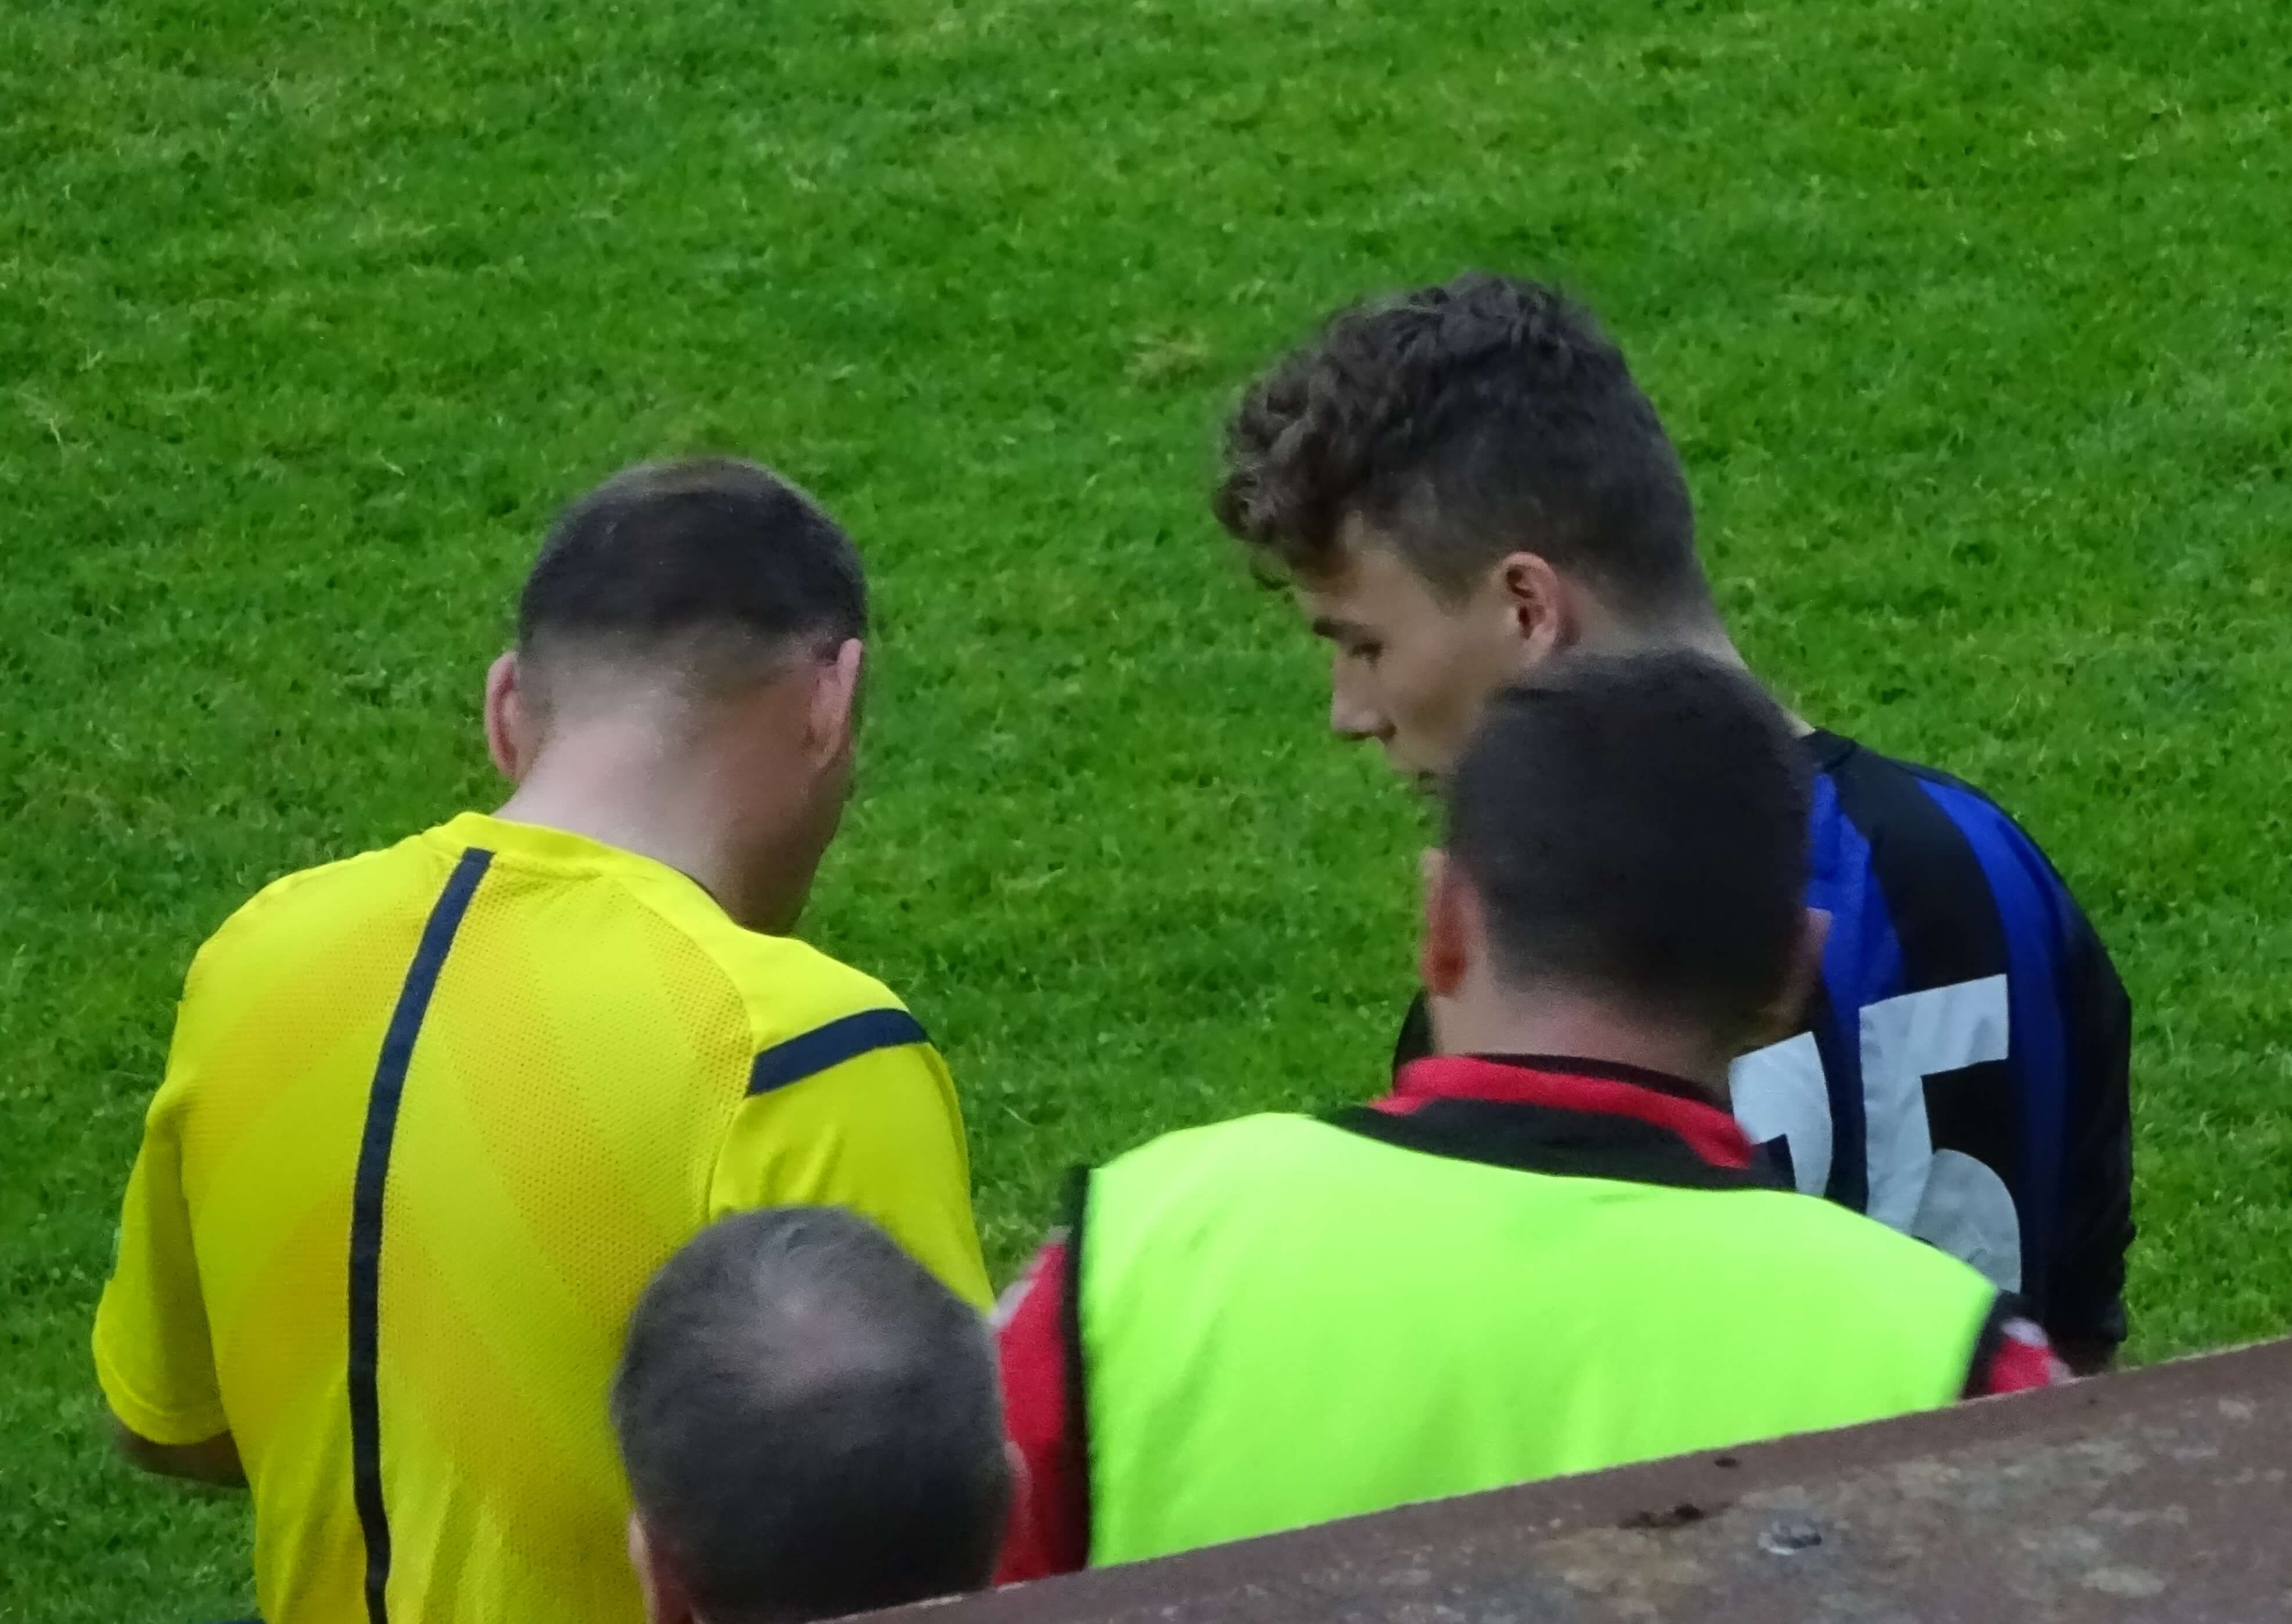 Trialist Liam Thomson gets his big moment spoiled by the referee